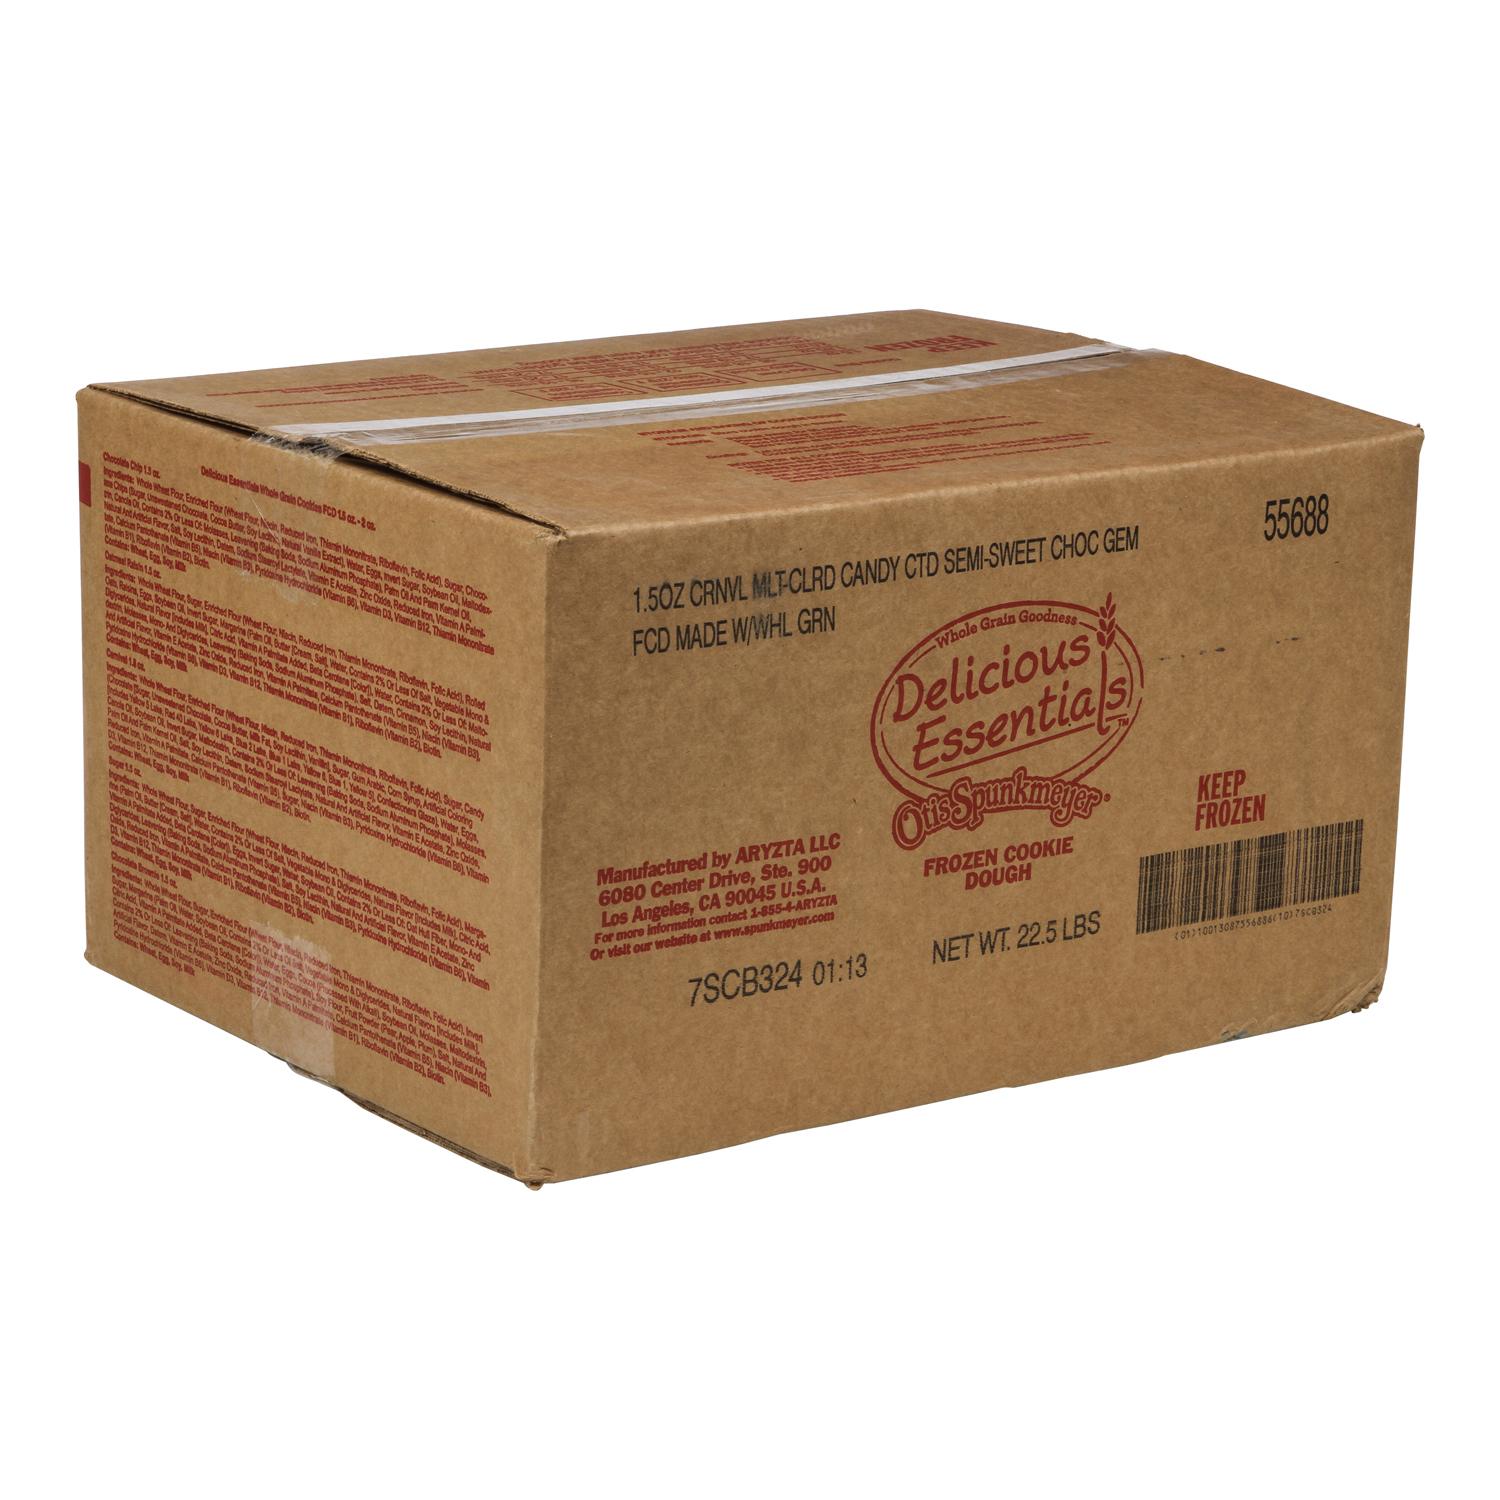 Image of cardboard box with carnival cookie